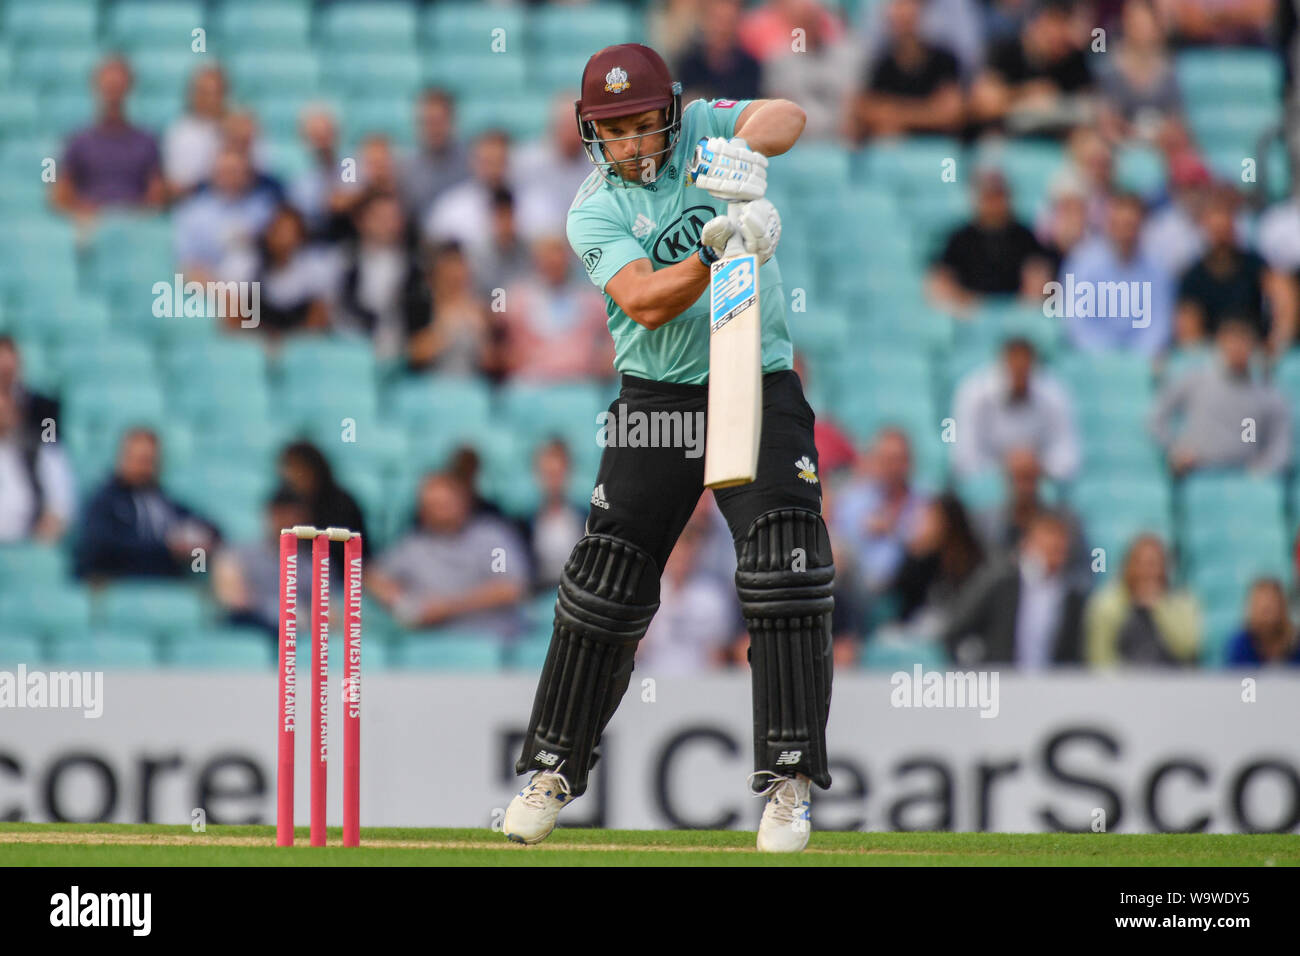 LONDON, UNITED KINGDOM. 15th Aug, 2019. Aaron. Finch of Surrey Cricket Club during T20 Vitality Blast Fixture between Surrey vs Sussex at The Kia Oval Cricket Ground on Thursday, August 15, 2019 in LONDON ENGLAND. Credit: Taka G Wu/Alamy Live News Stock Photo